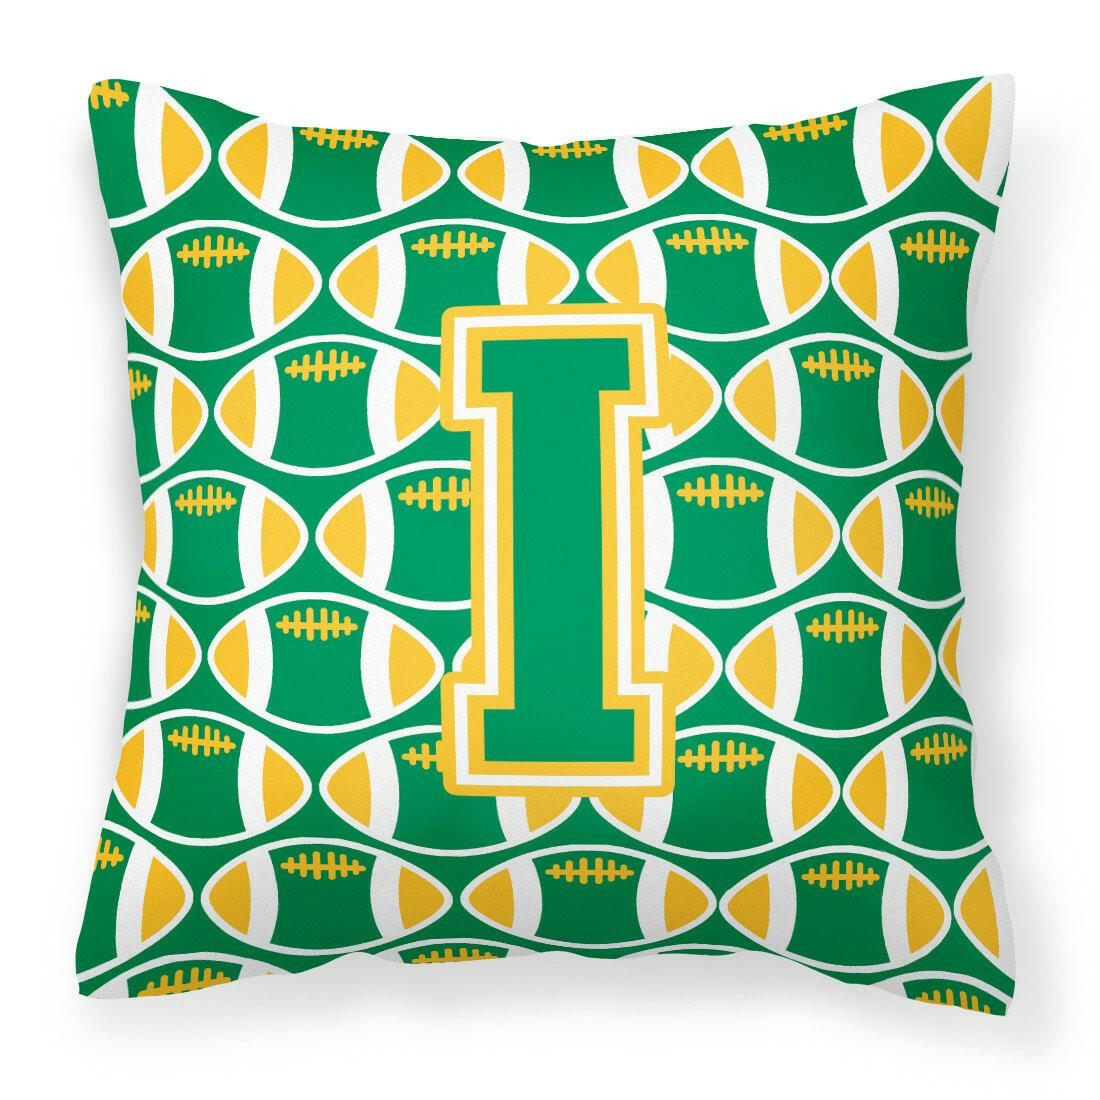 Letter I Football Green and Gold Fabric Decorative Pillow CJ1069-IPW1414 by Caroline's Treasures